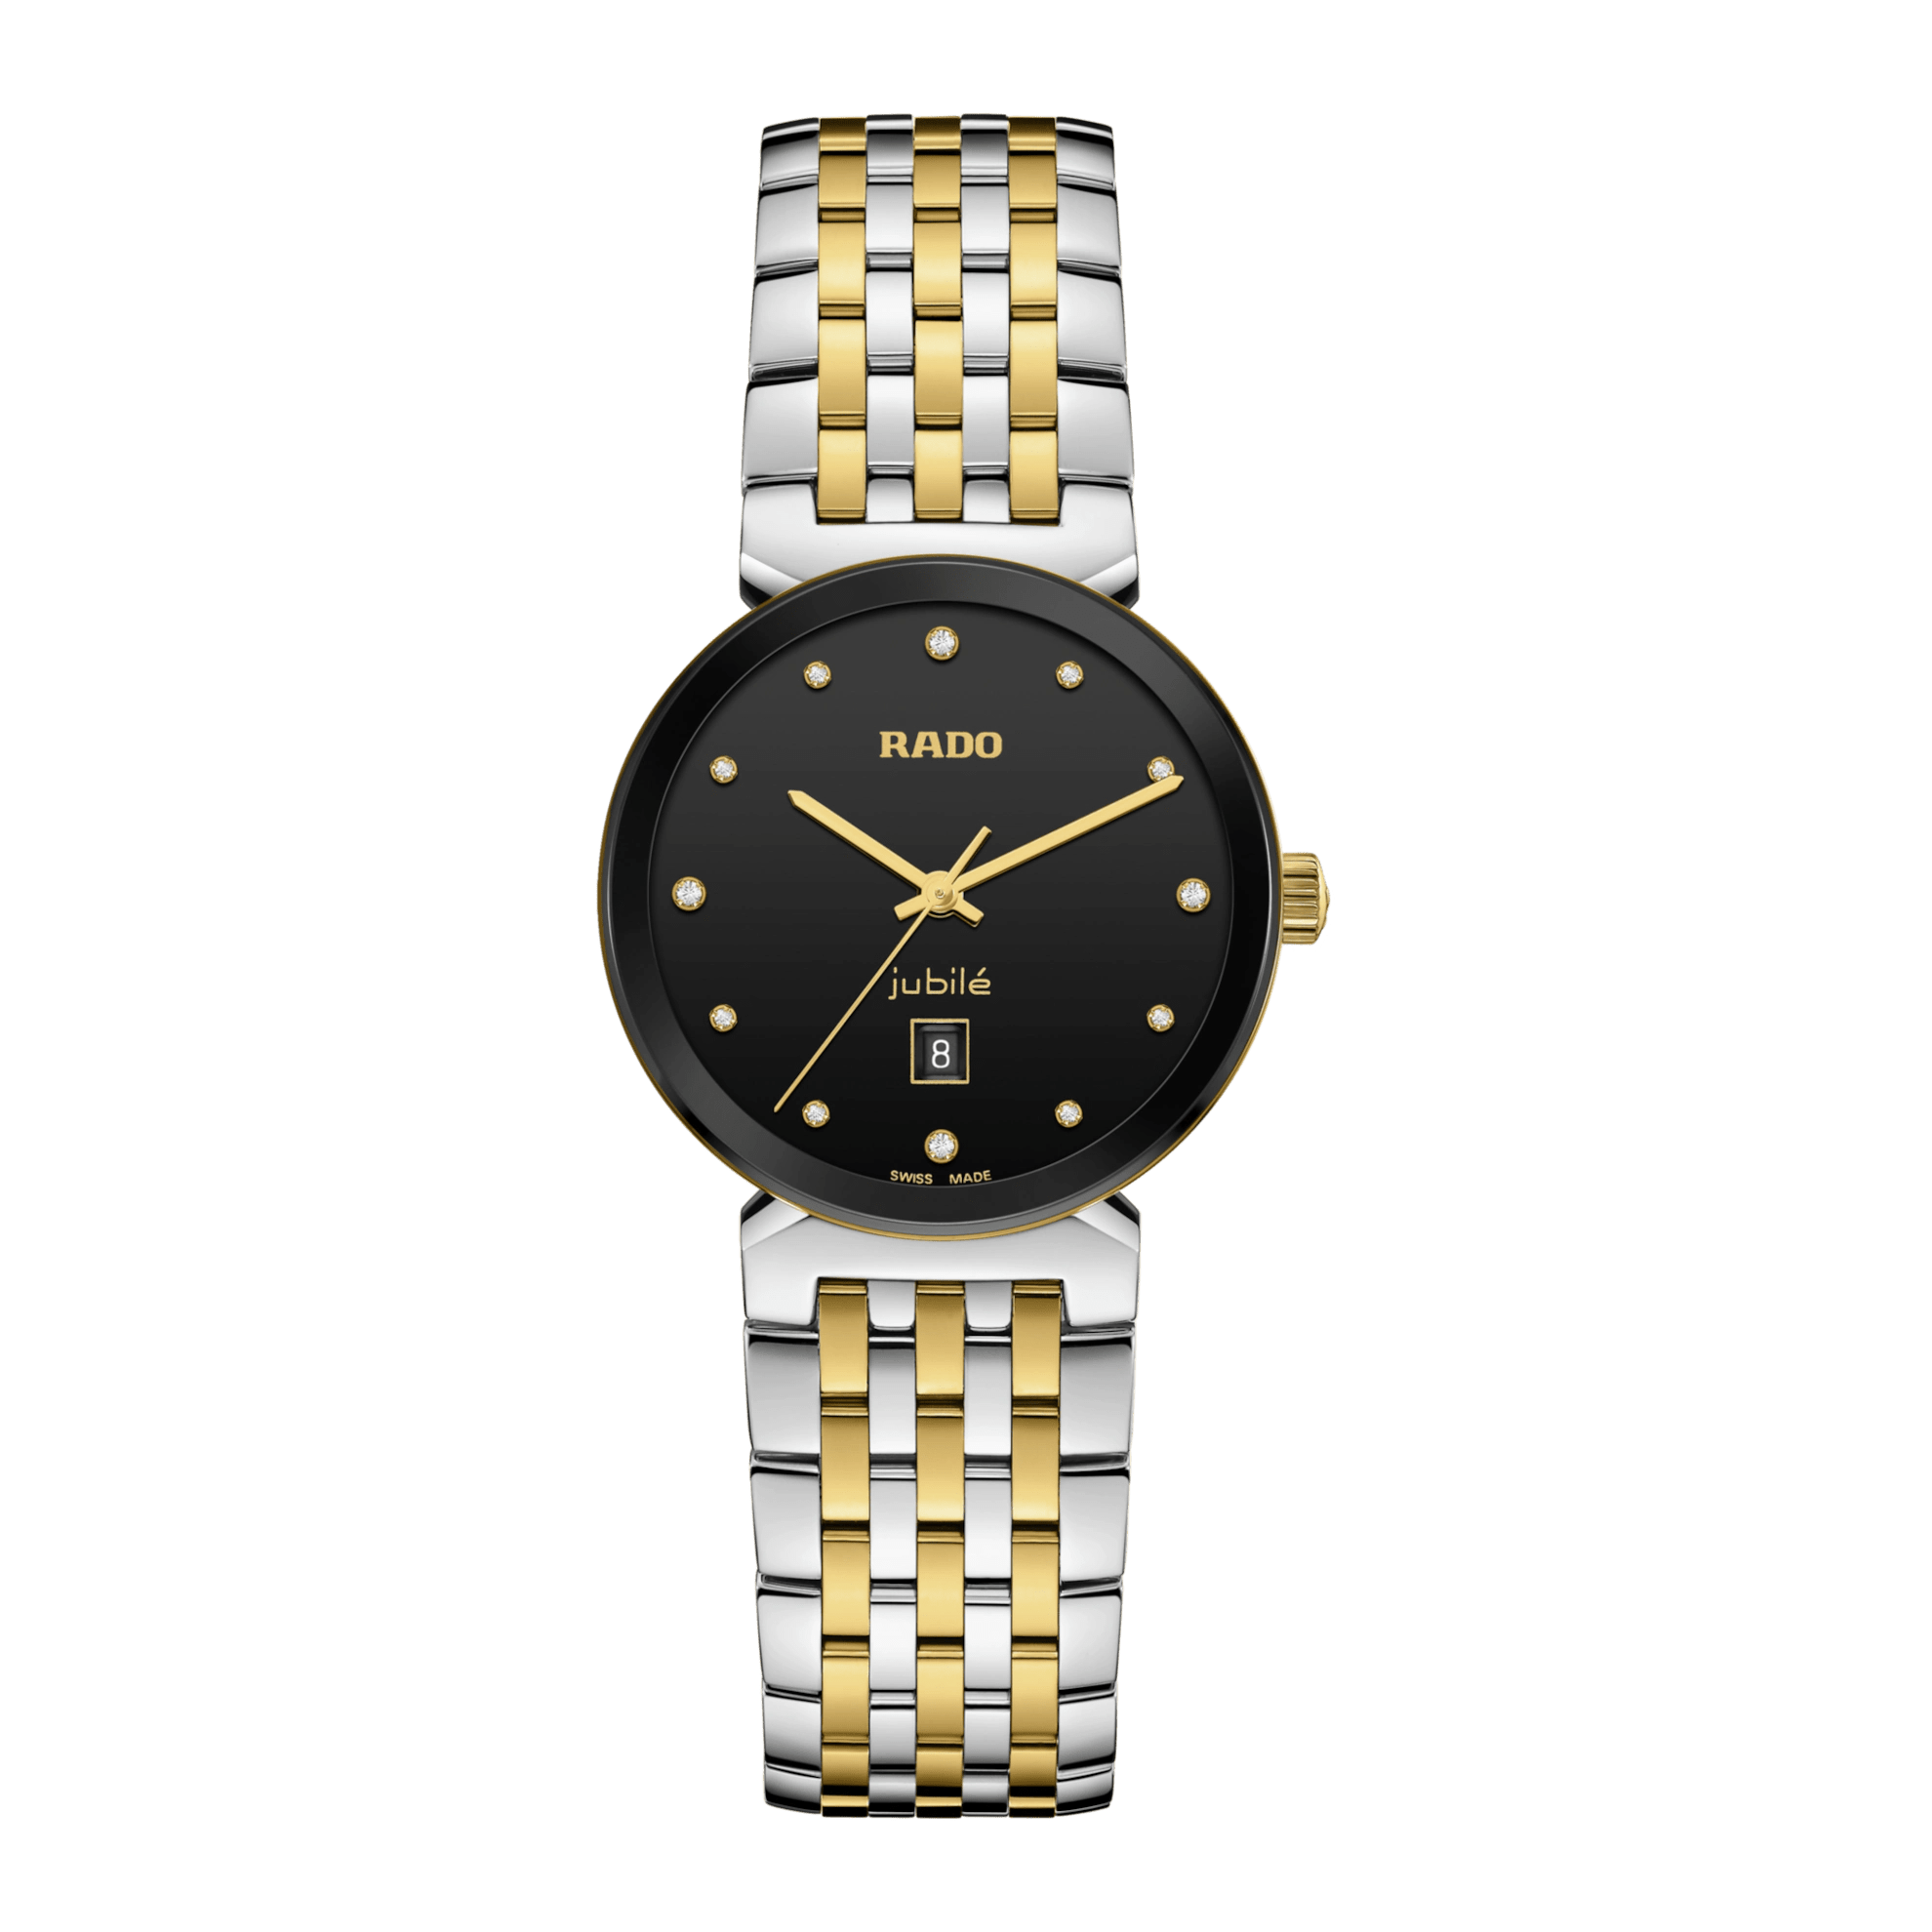 Rado] My first time purchasing a watch over $1,000. : r/Watches